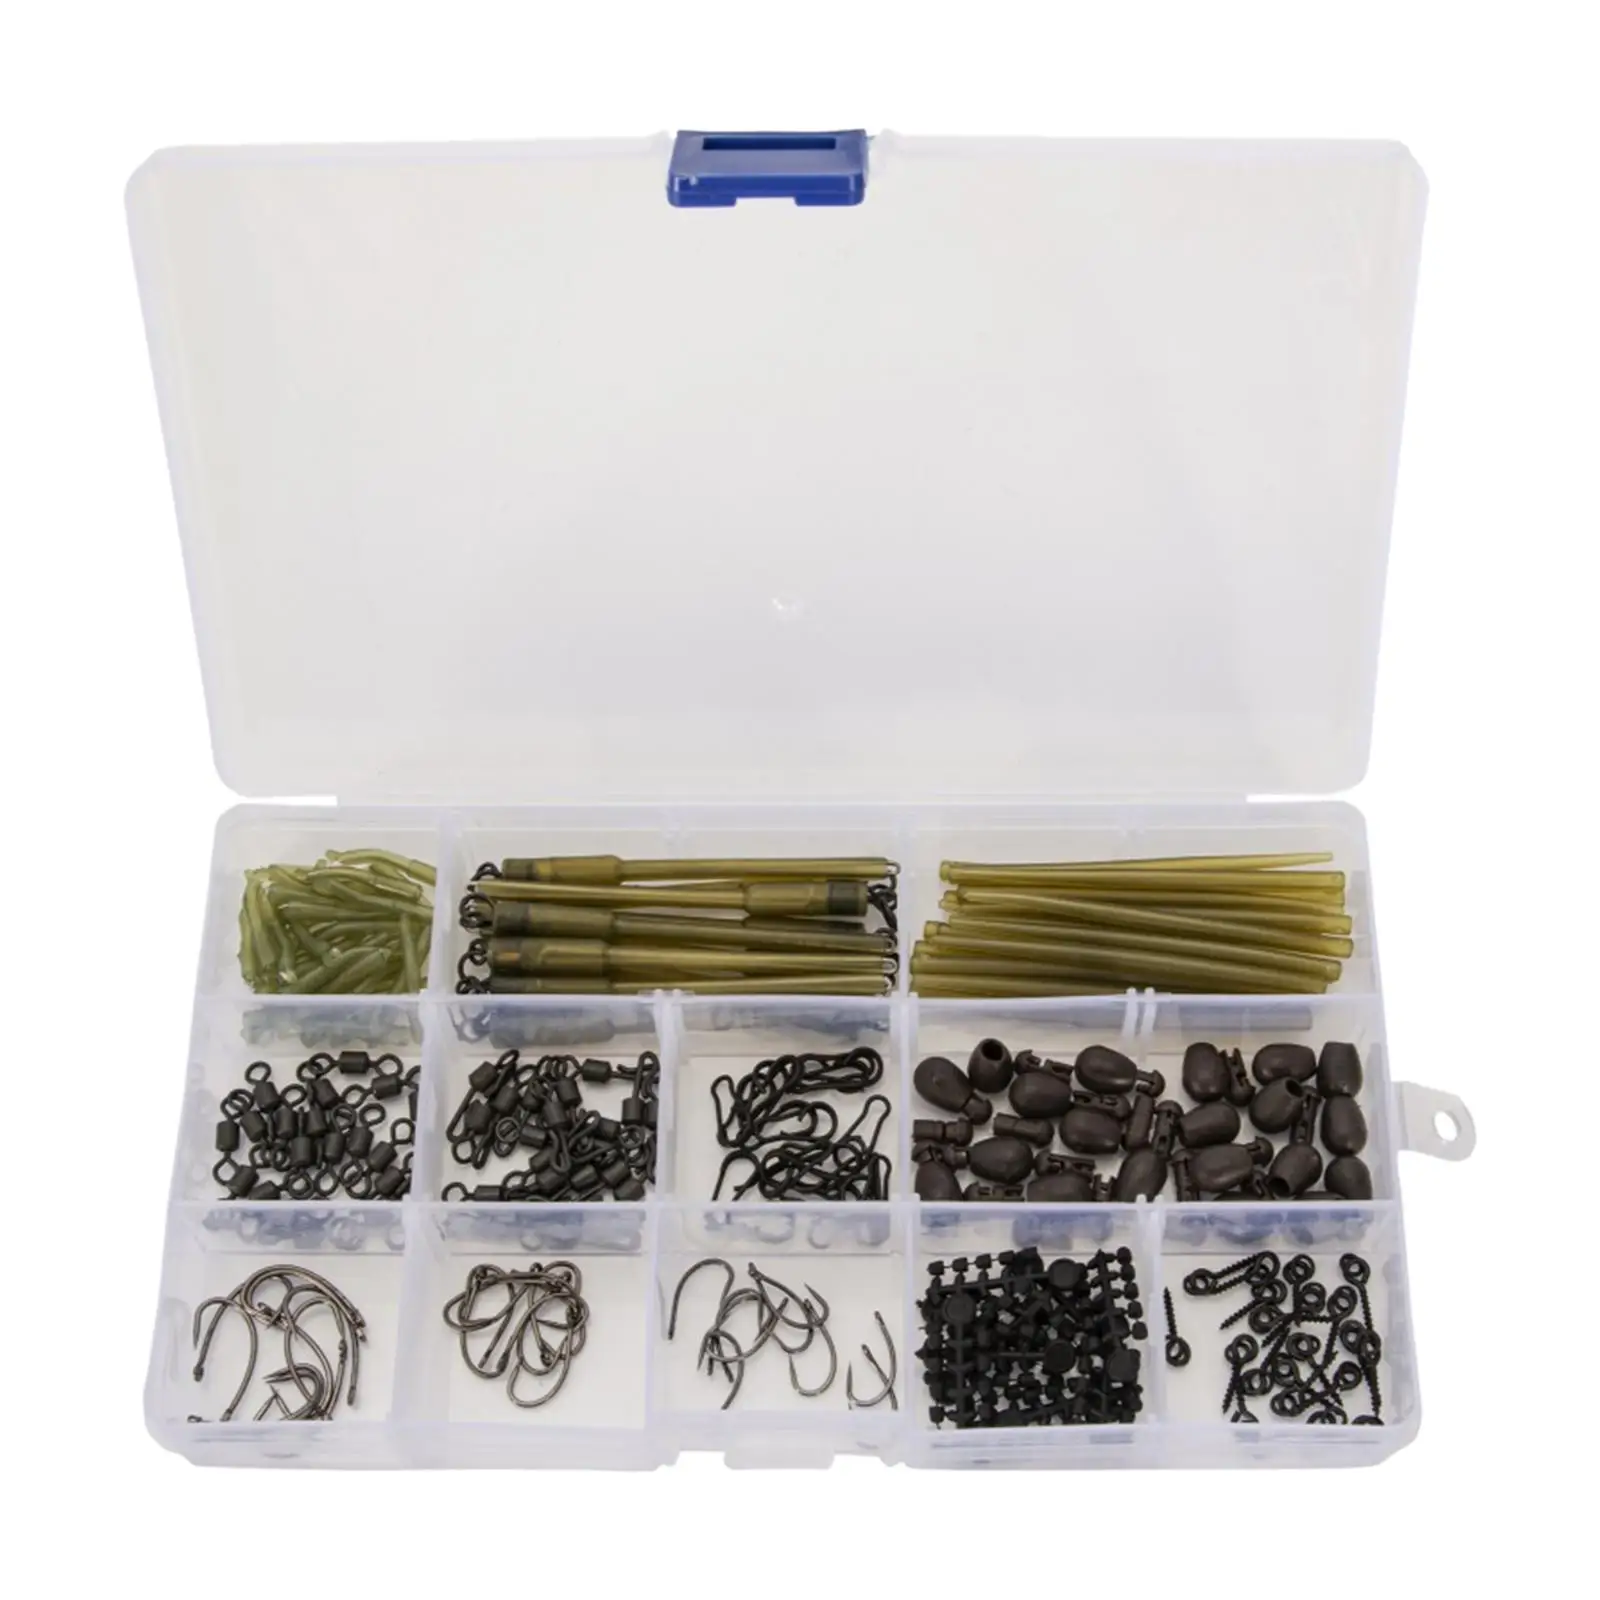 Carp Fishing Accessories Kit High Carbon Steel Hooks with Storage Box Fish Gear Equipment